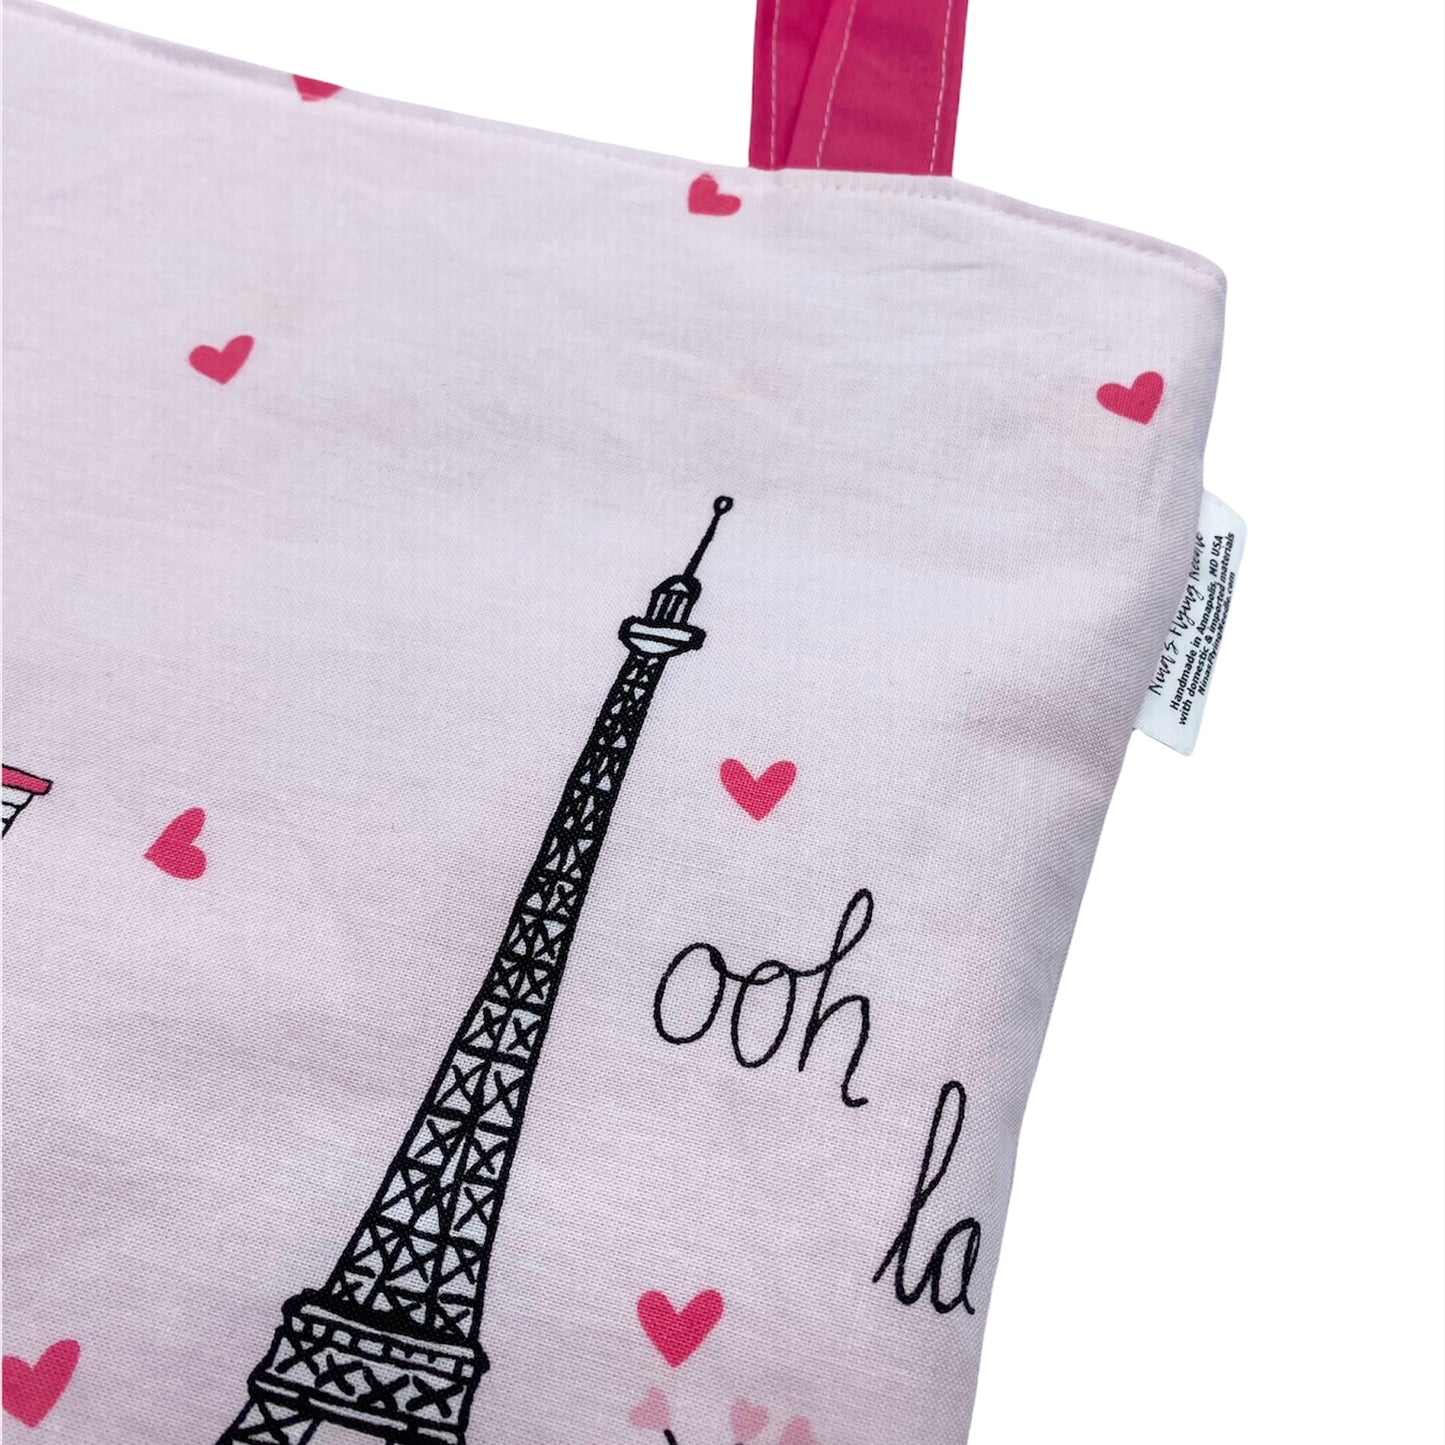 Children's Library Book Sized Reversible Tote Paris